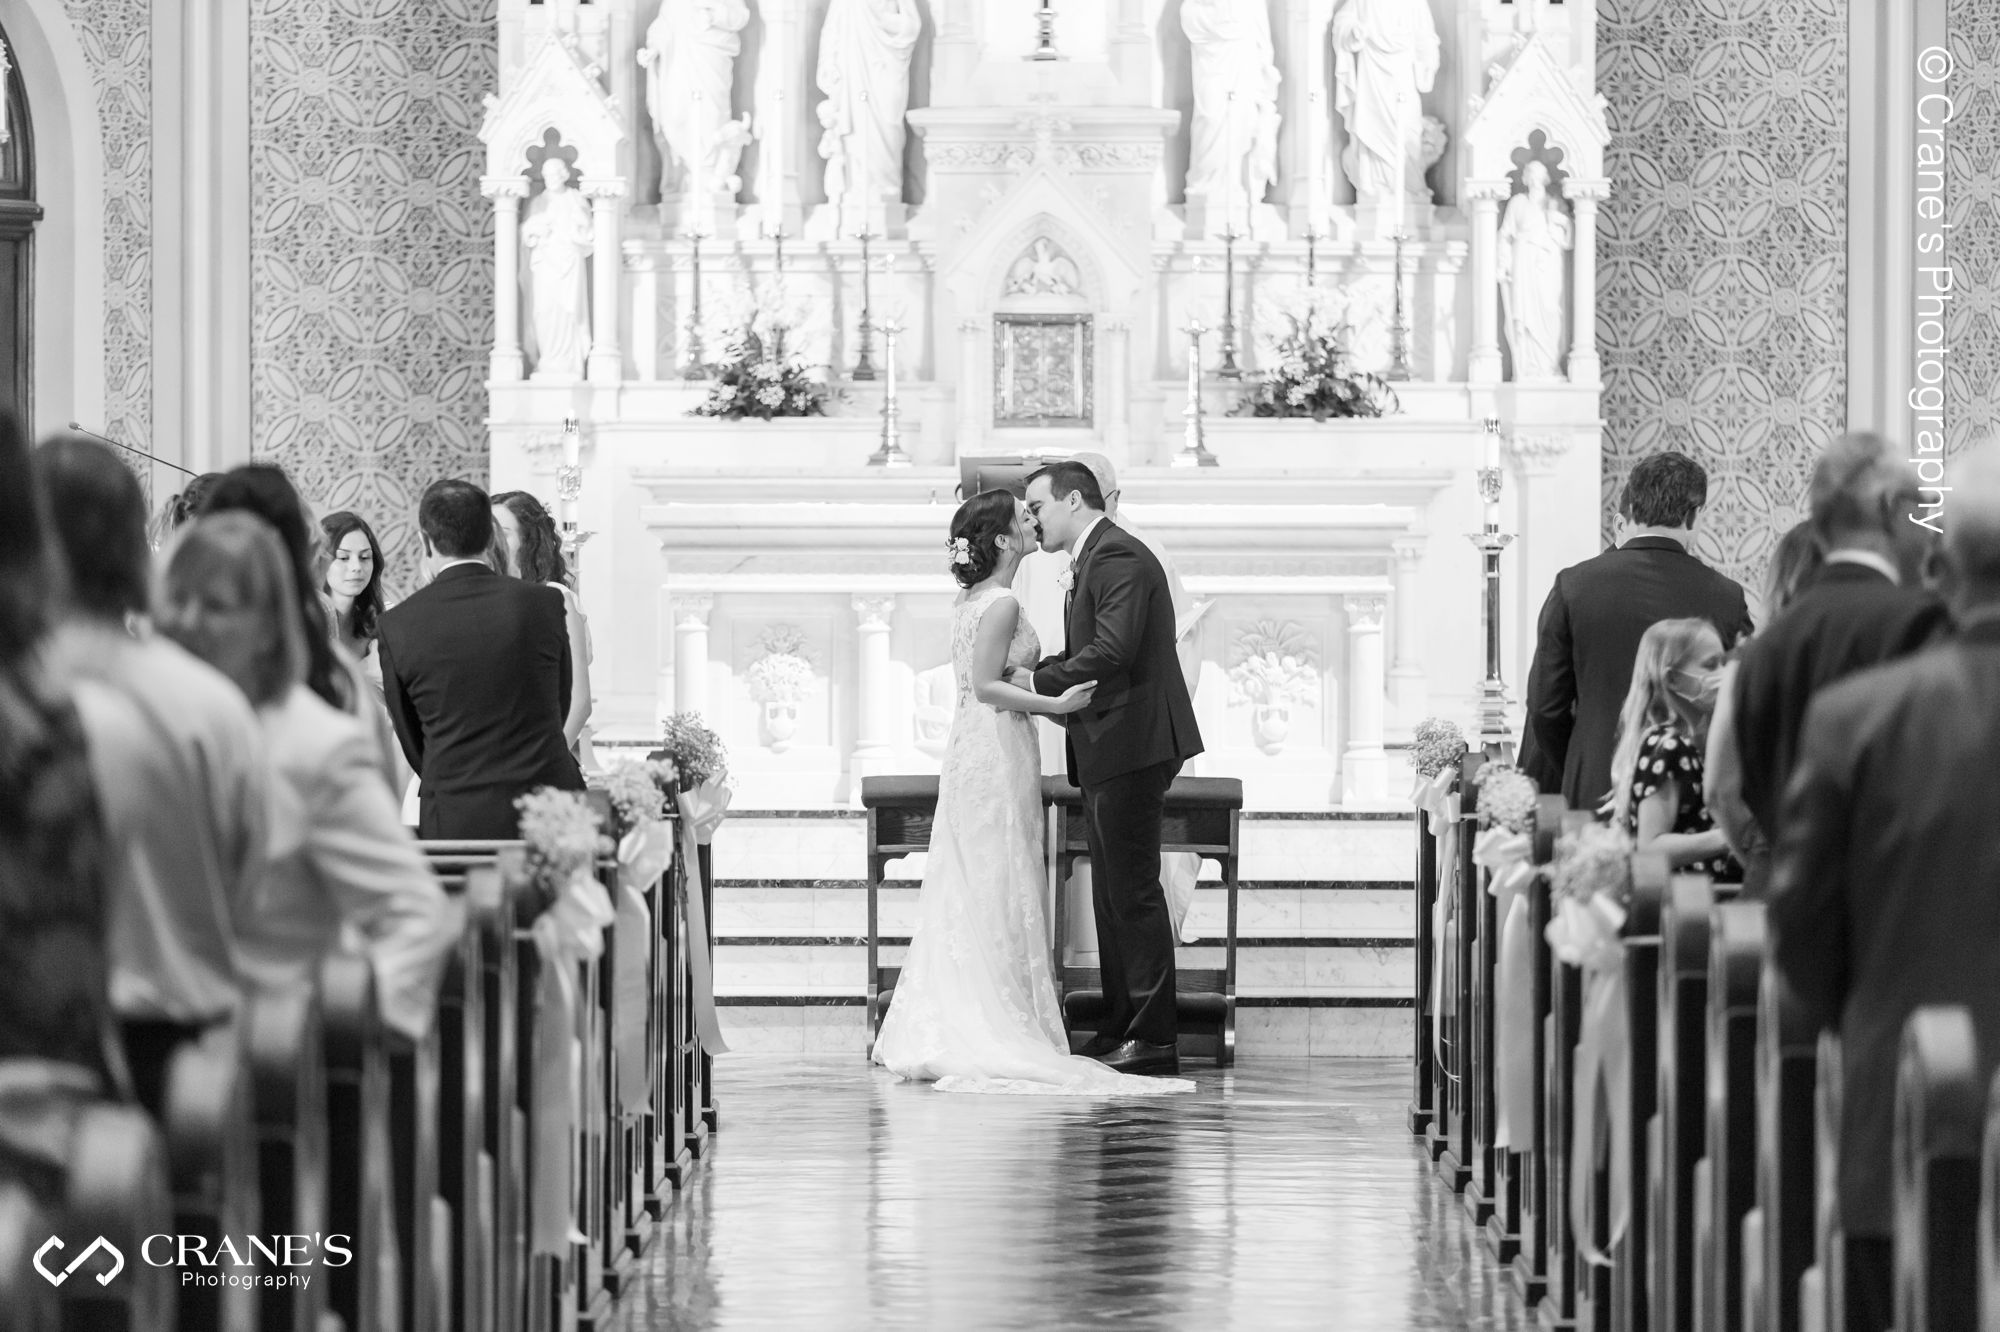 Bride and groom's first kiss at their wedding ceremony at Our Lady of Mount Carmel Chicago